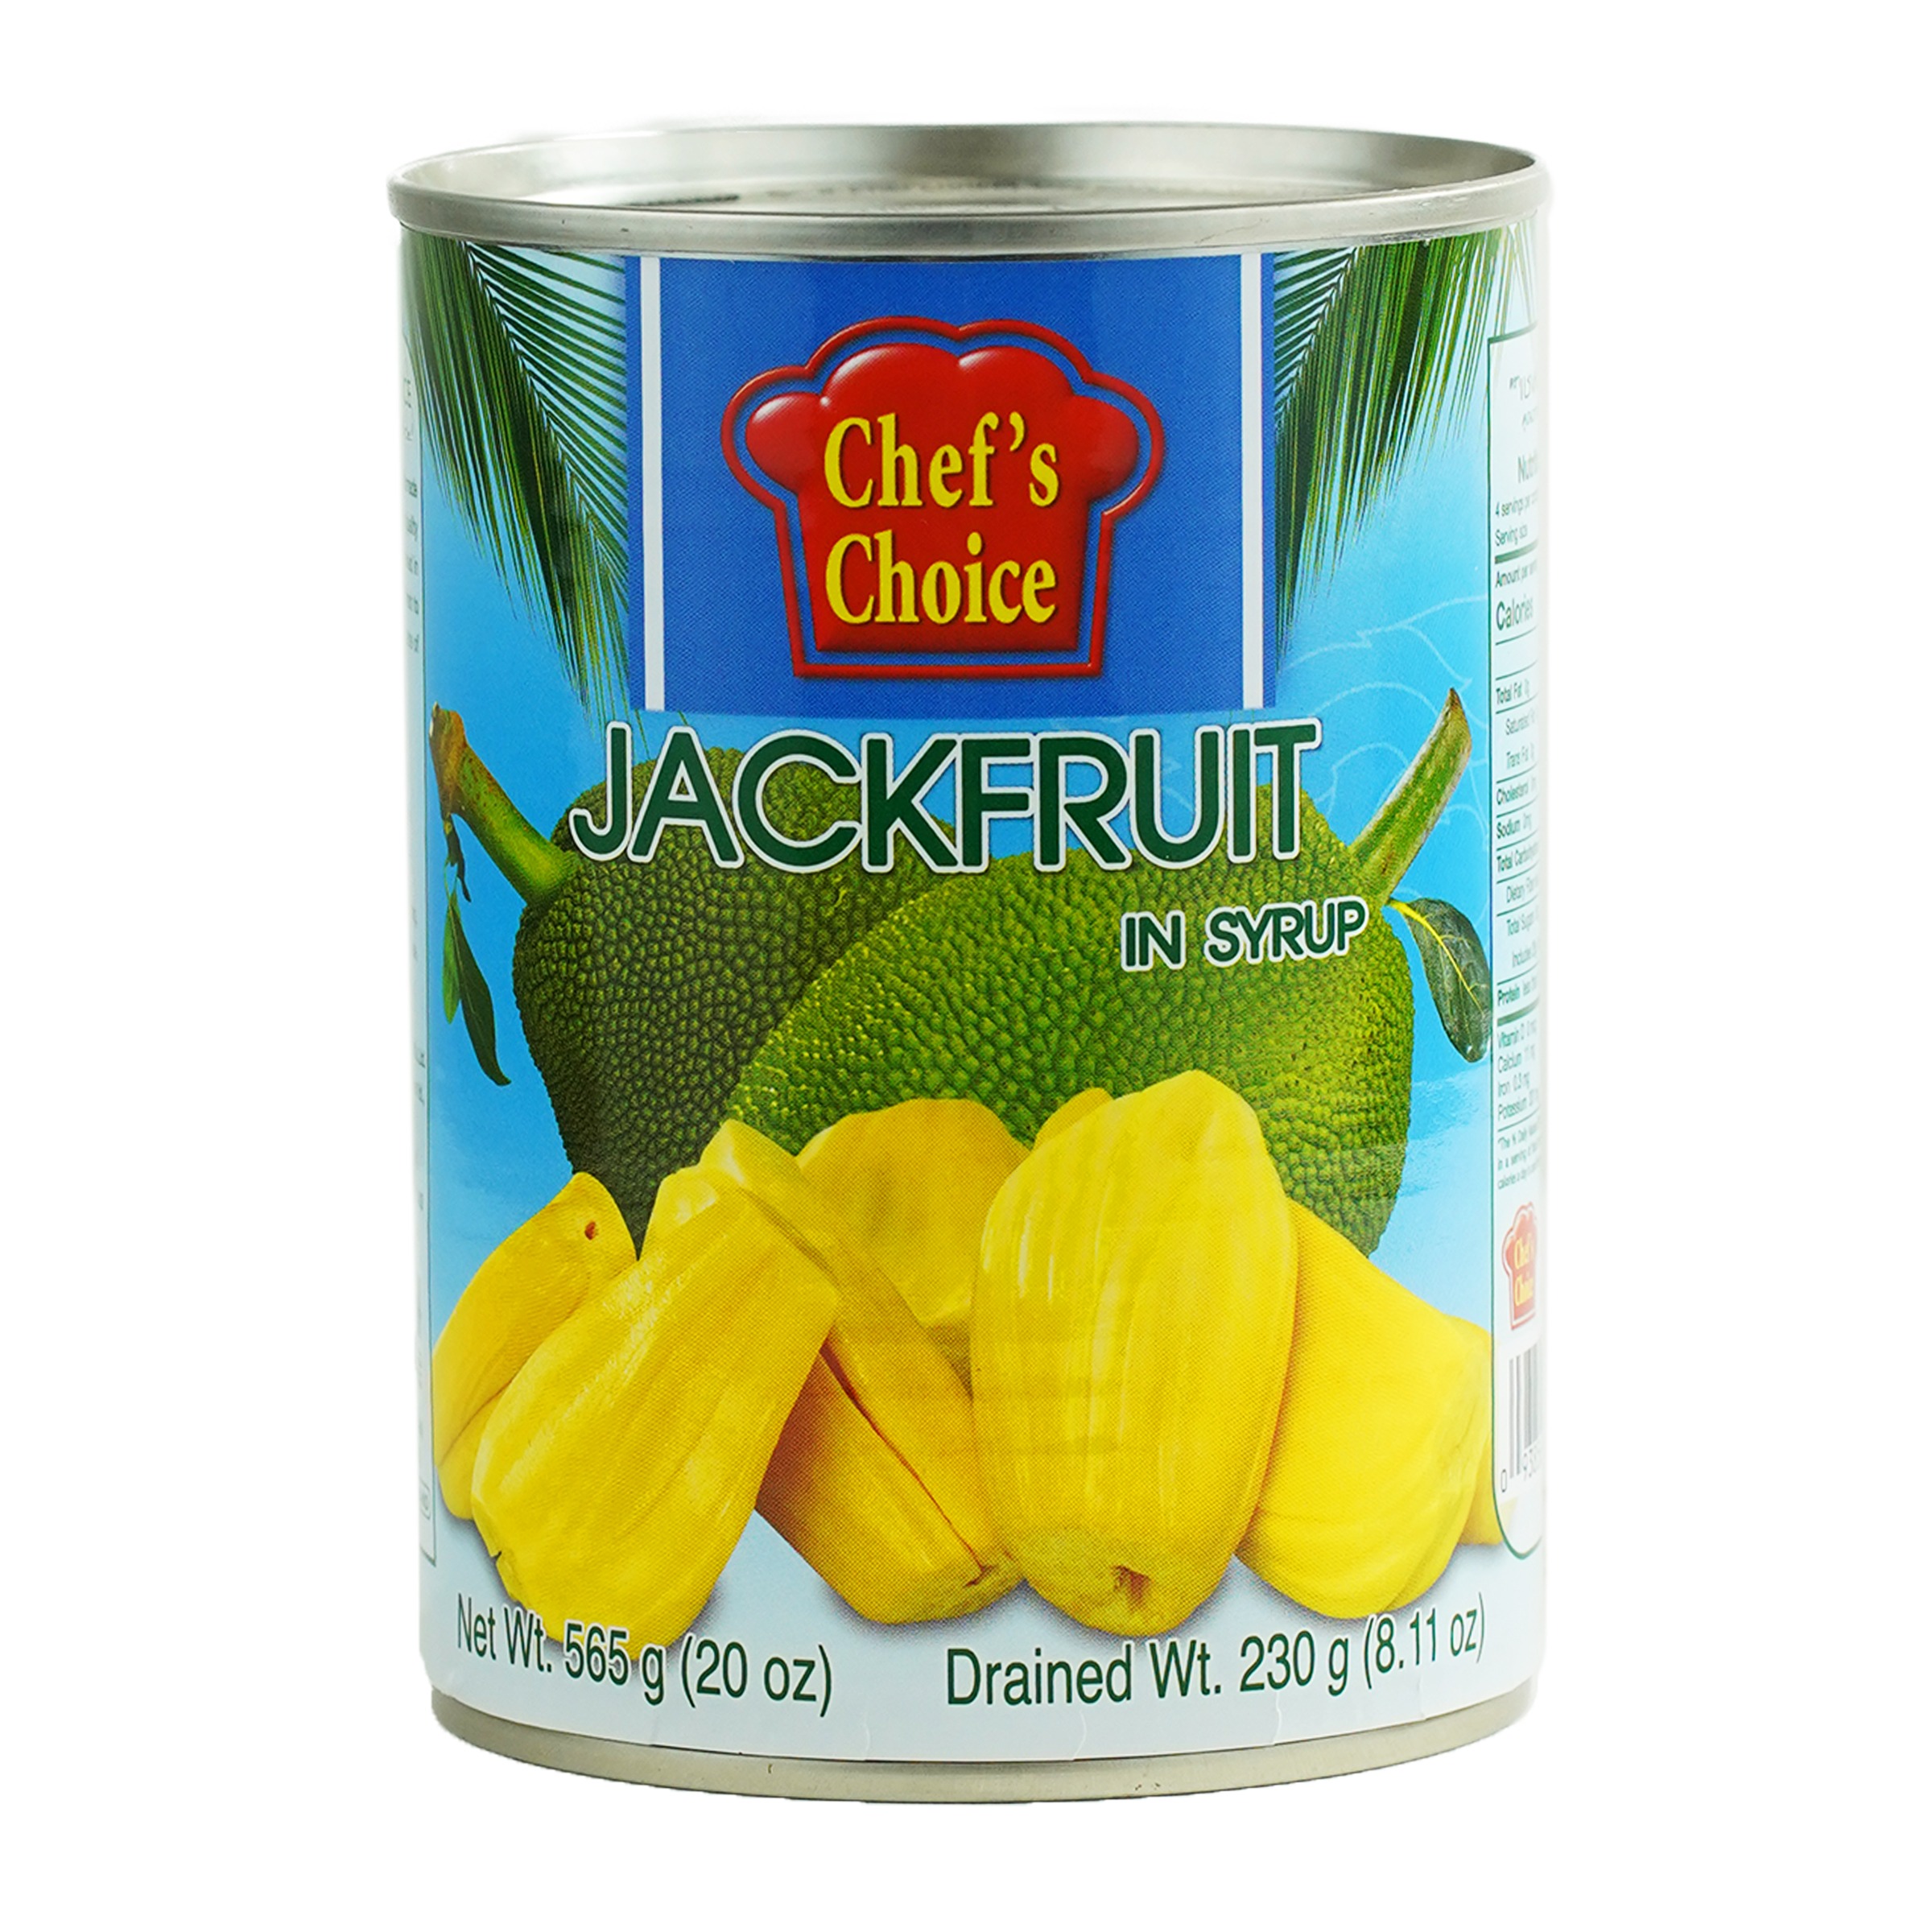 Chef's Choice Jackfruit in Syrup, 20 oz (24-Count) - VIFON